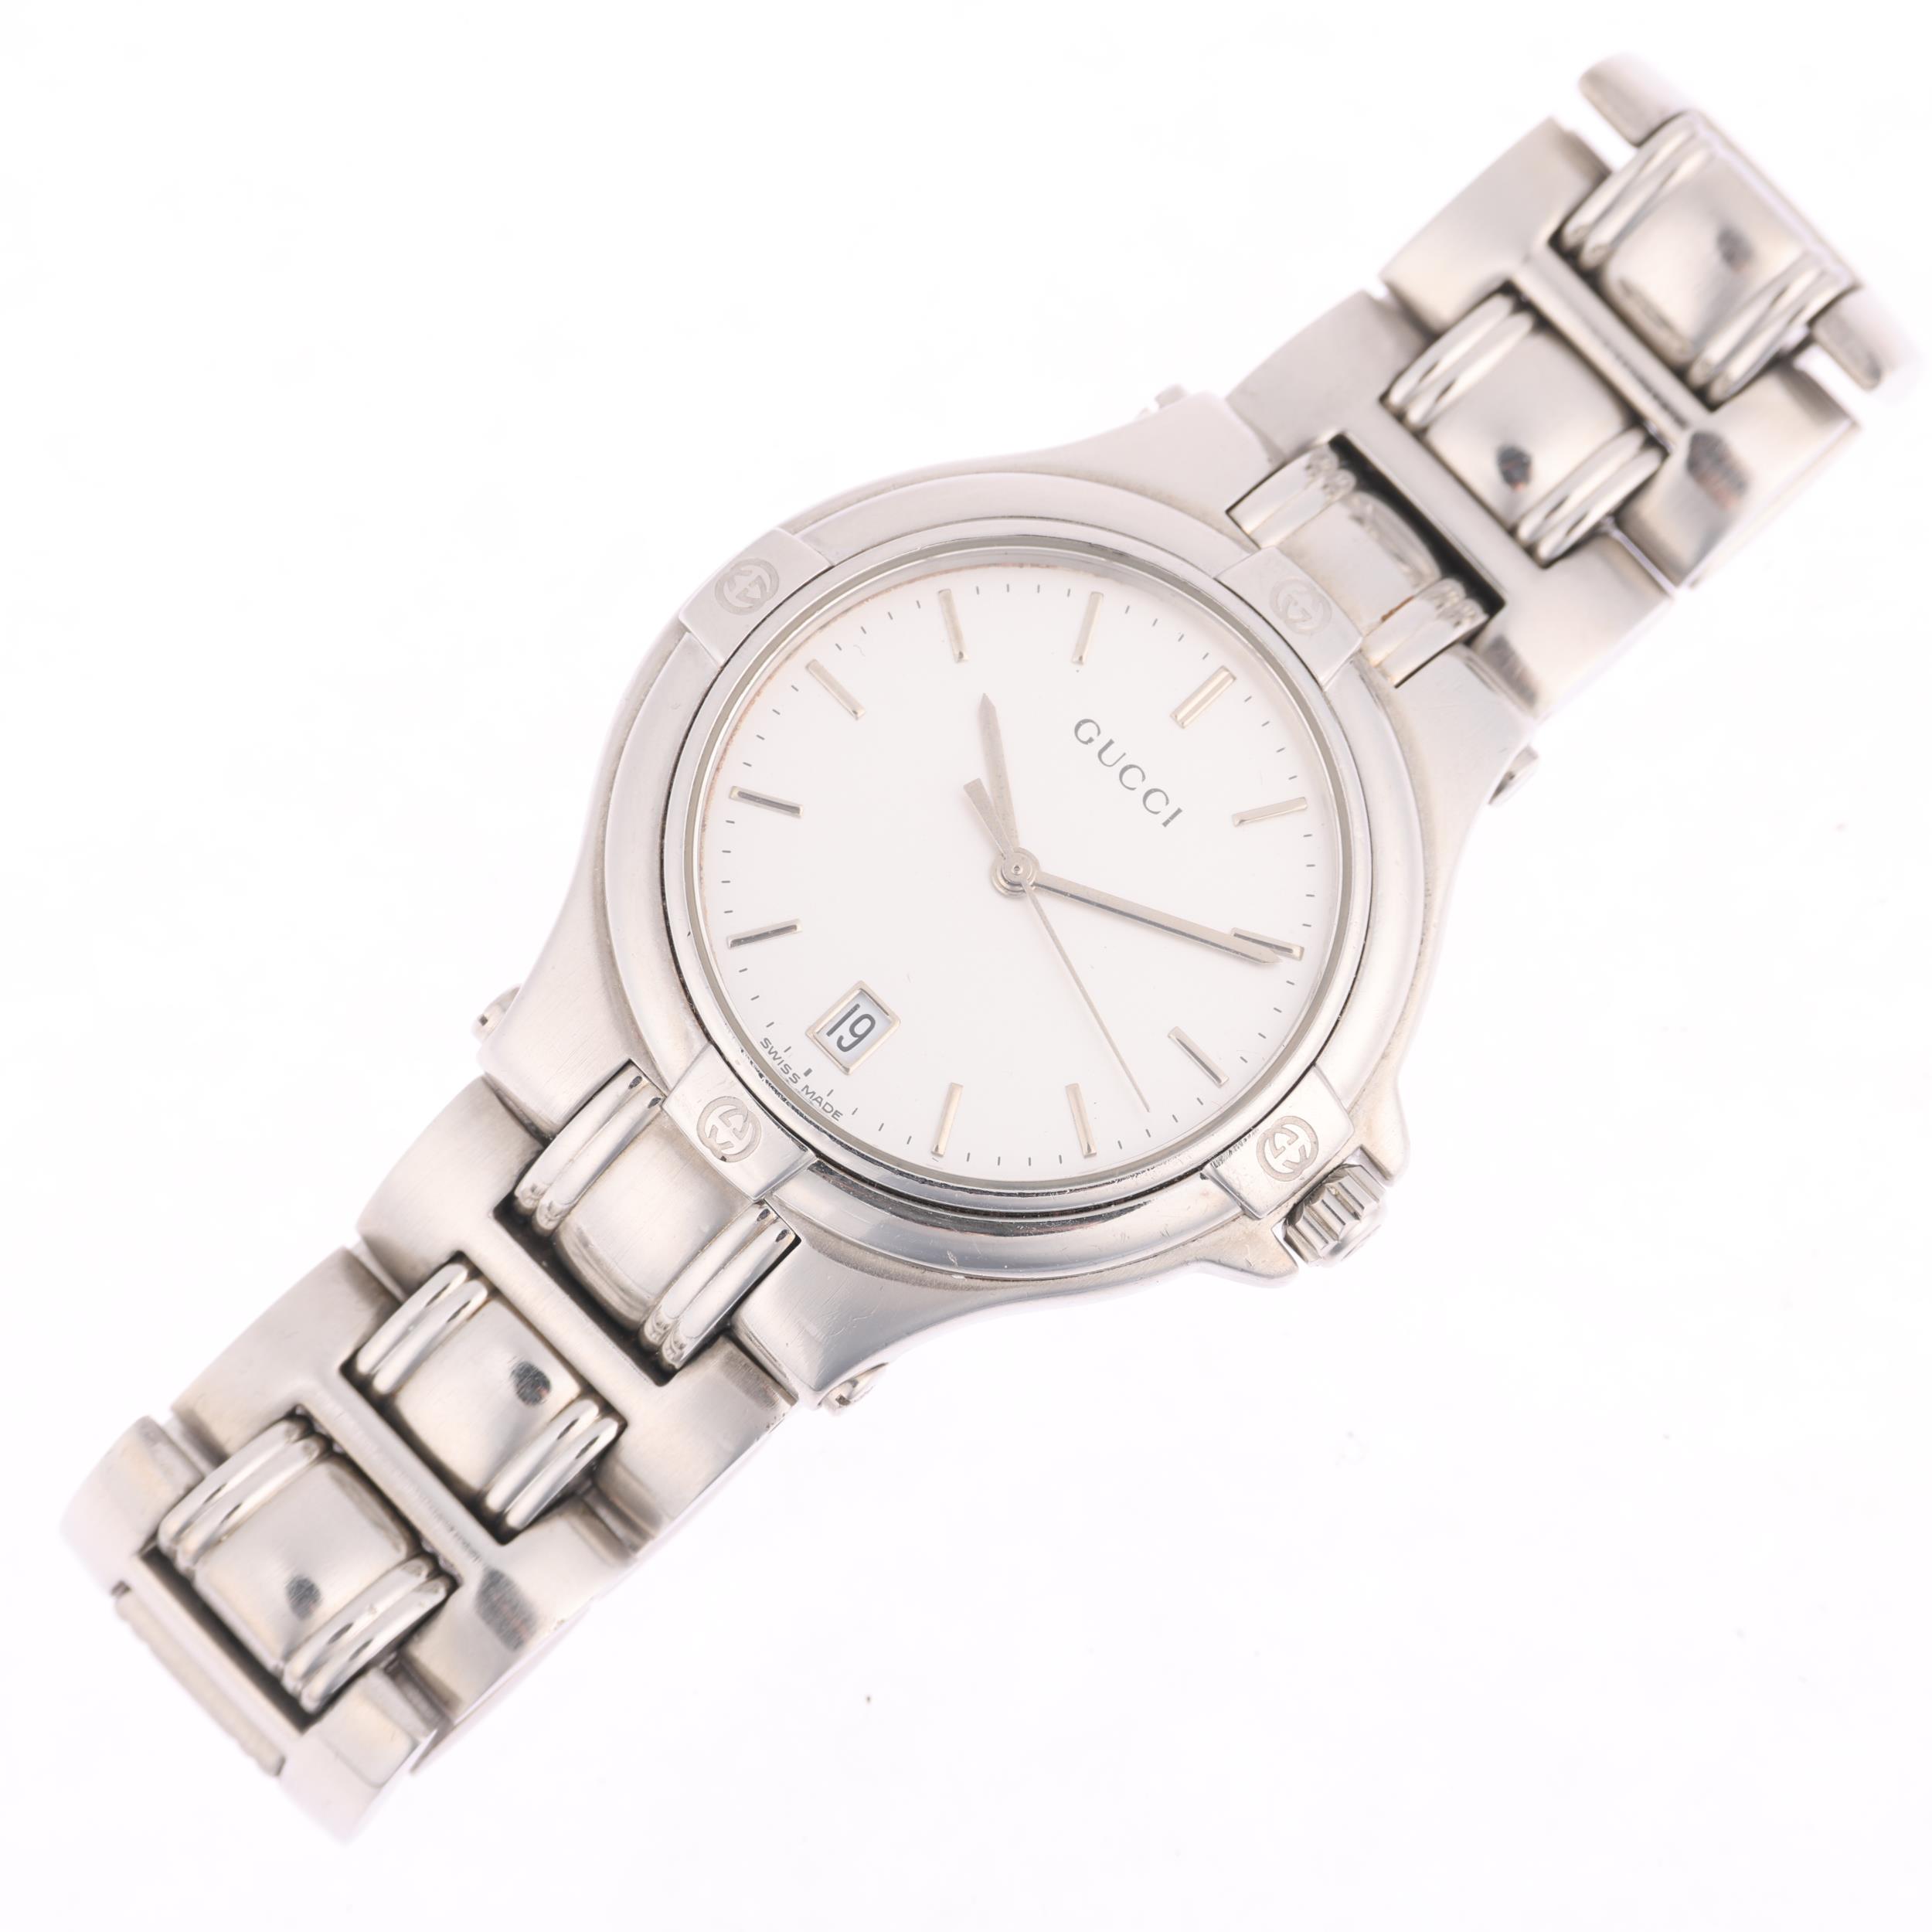 GUCCI - a stainless steel 9040M quartz calendar bracelet watch, silvered dial with baton hour - Image 2 of 5